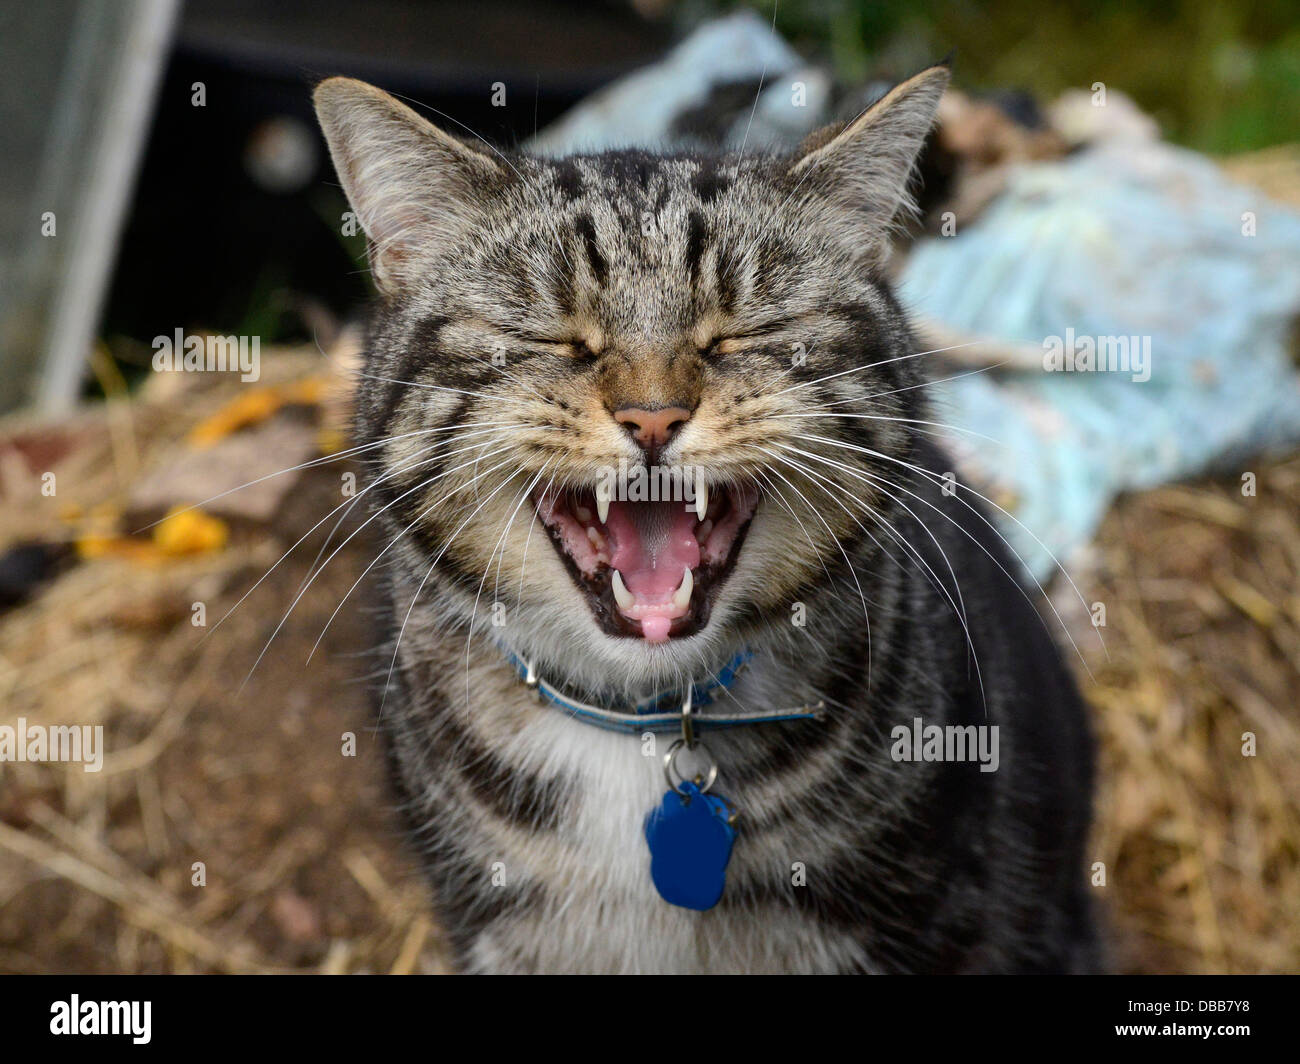 Tabby cat yawning, with eyes closed. Stock Photo